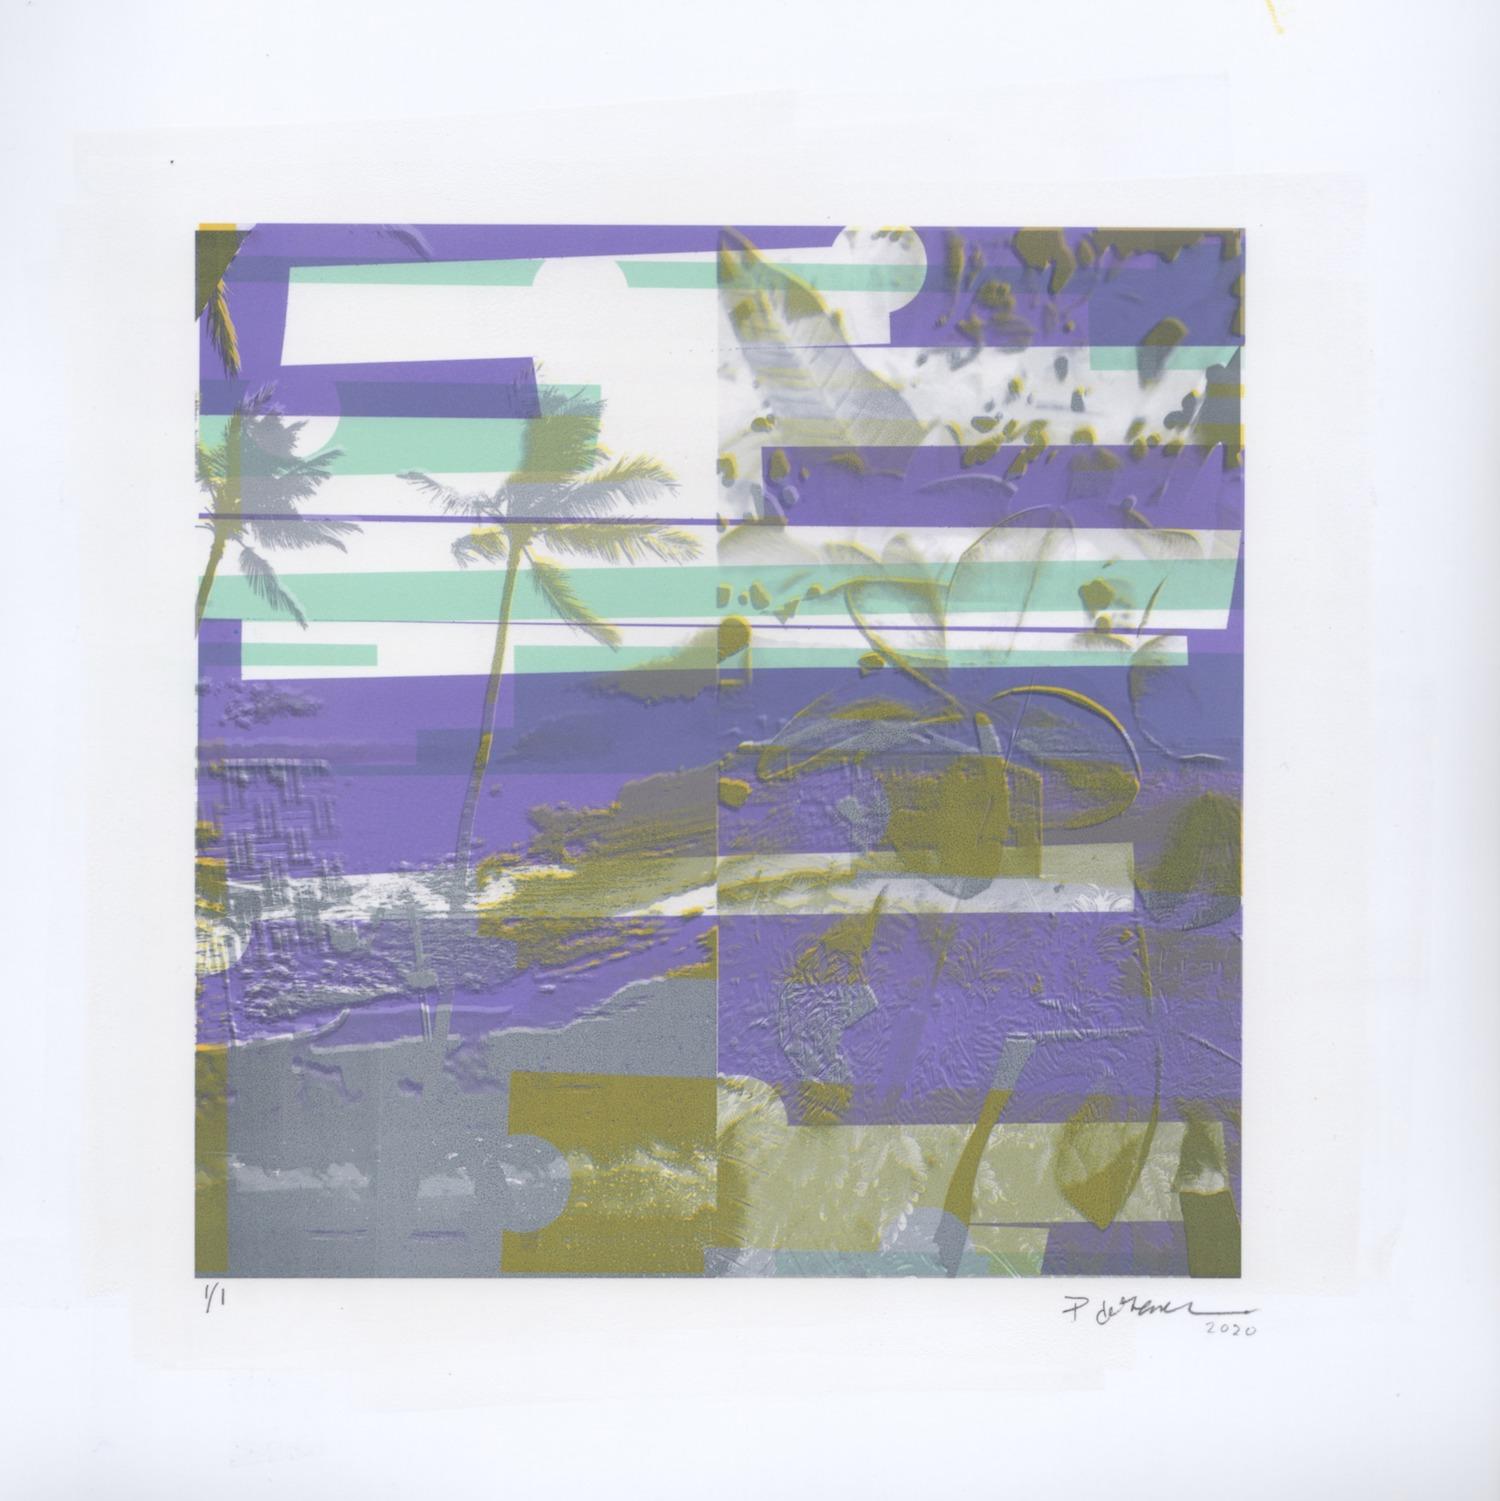 Patty deGrandpre Abstract Print - "Kauai, Tranquility", abstract, landscape, lavender, green, turquoise, print